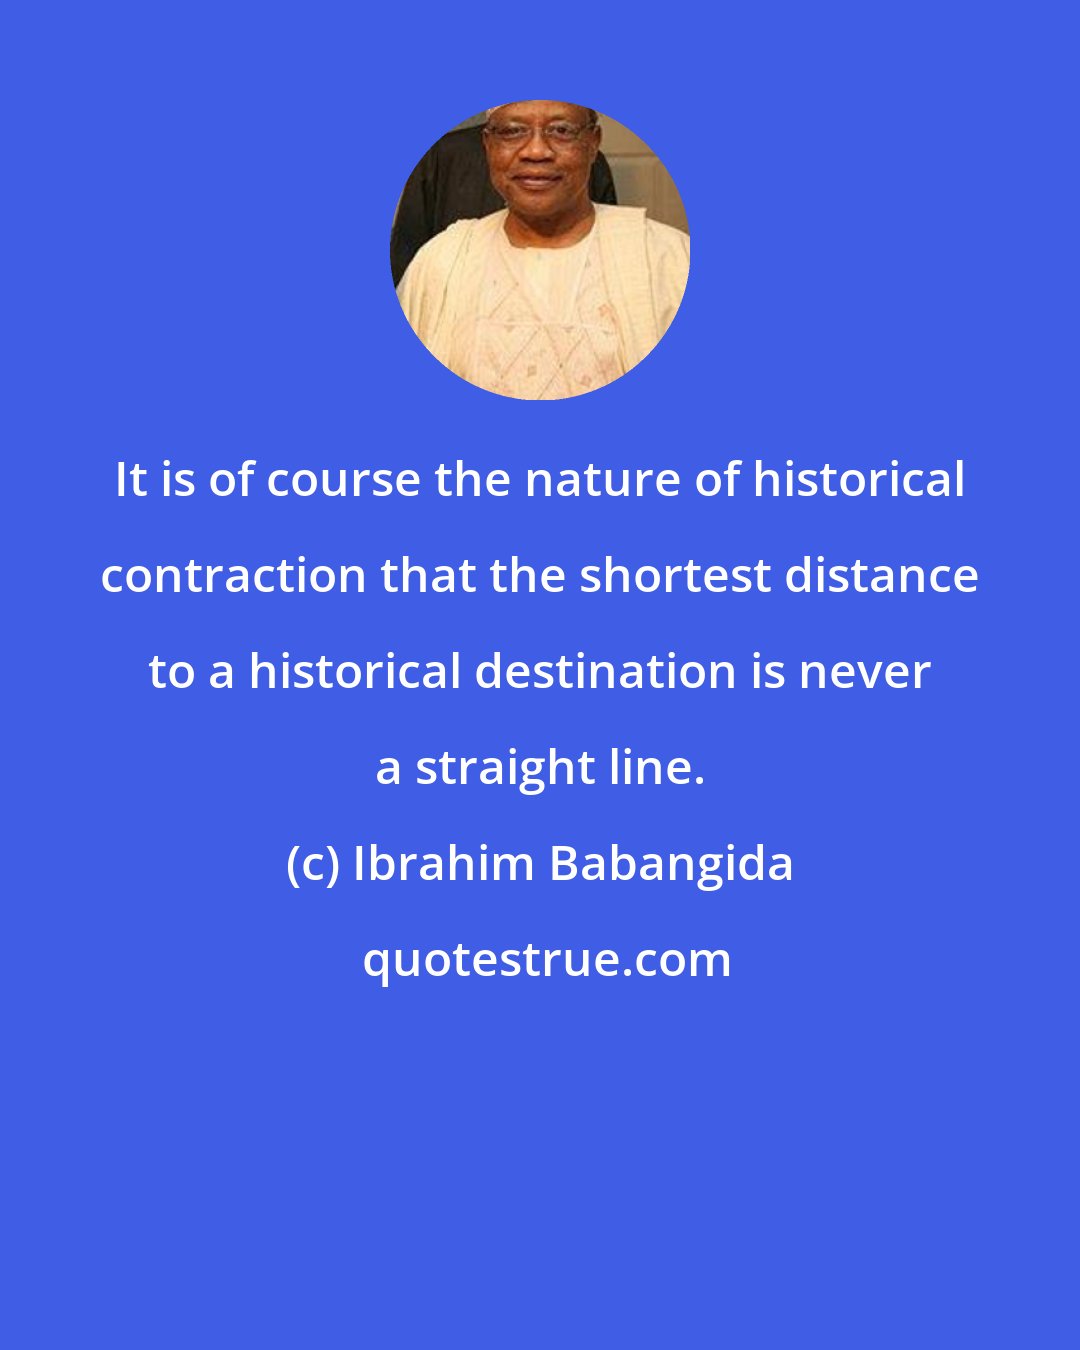 Ibrahim Babangida: It is of course the nature of historical contraction that the shortest distance to a historical destination is never a straight line.